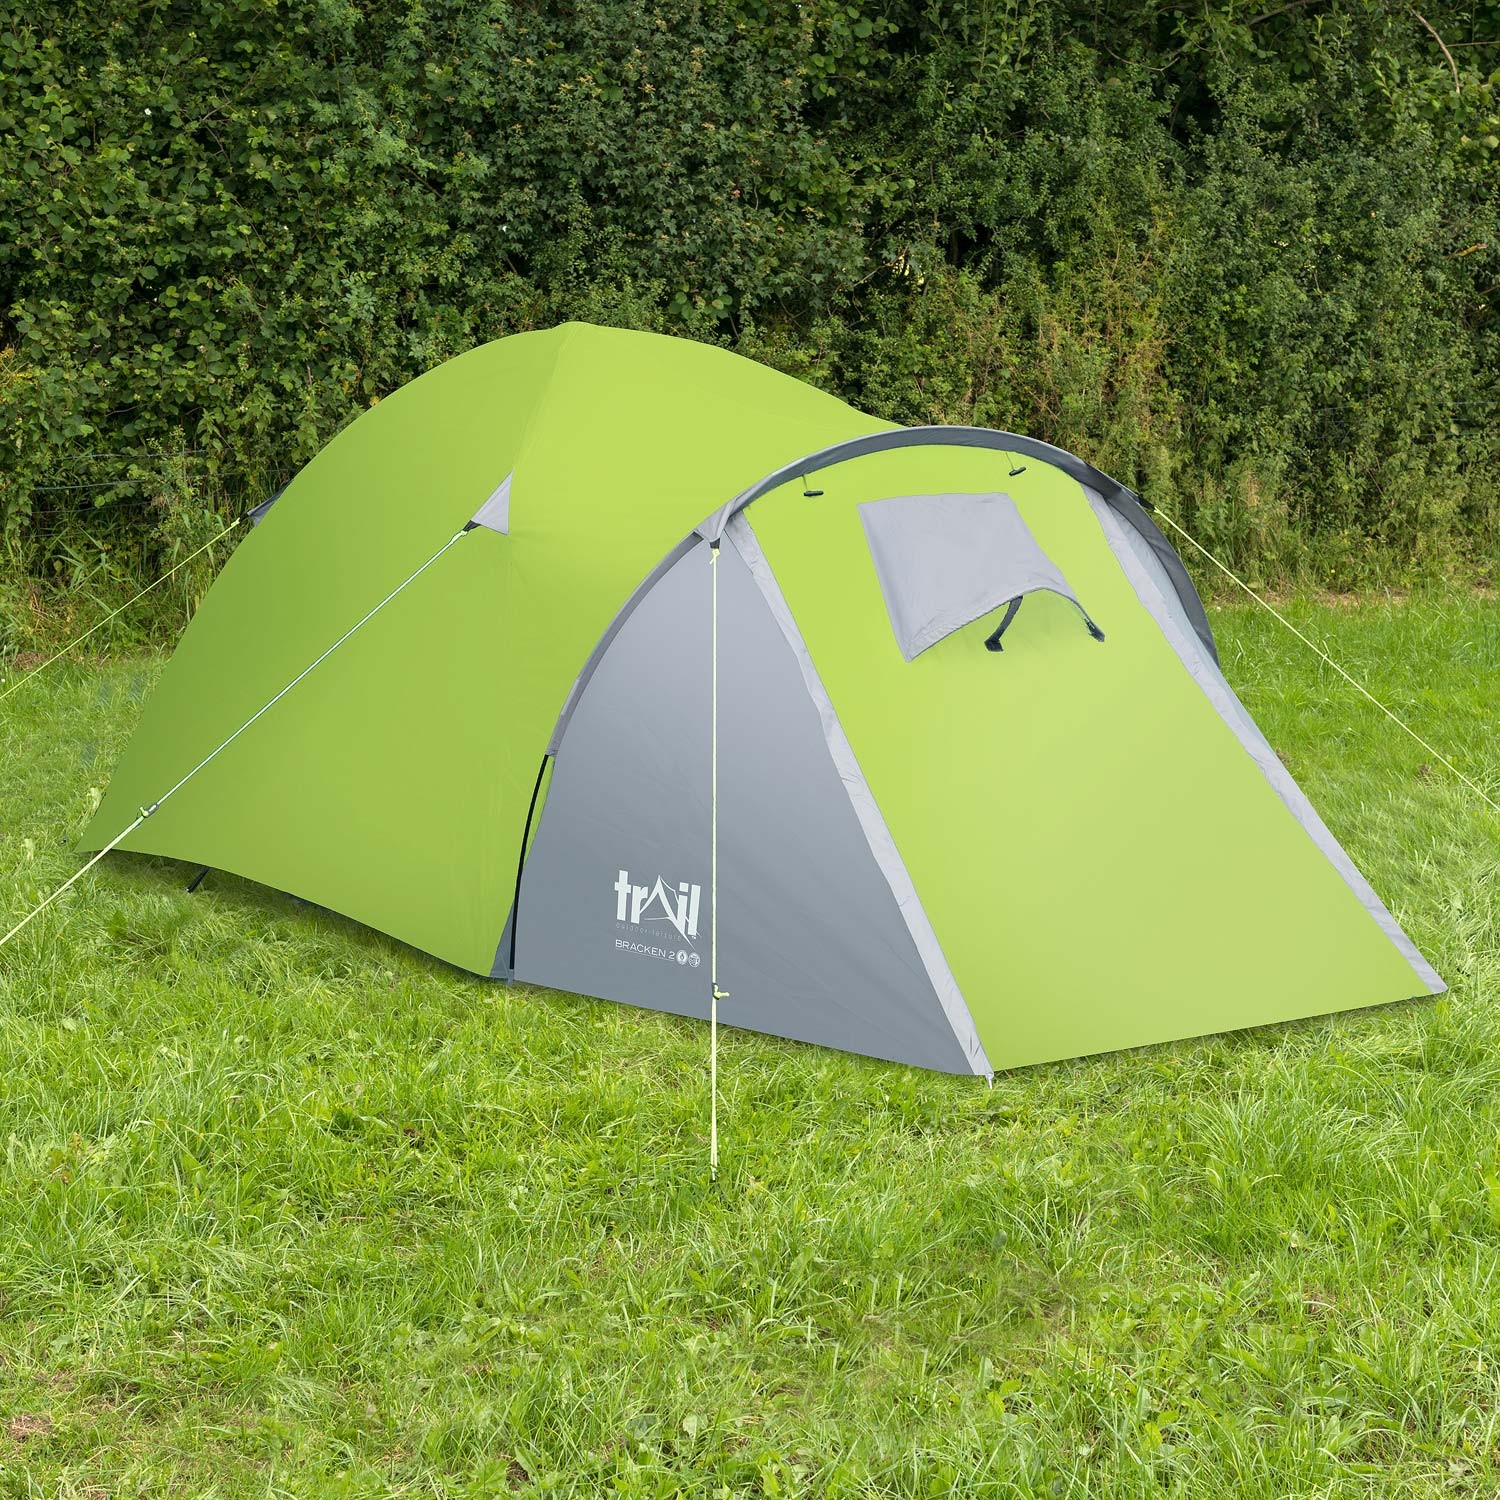 2 Man Tent Double Wall Skin Dome With Porch Two Person Camping Festival Trail eBay